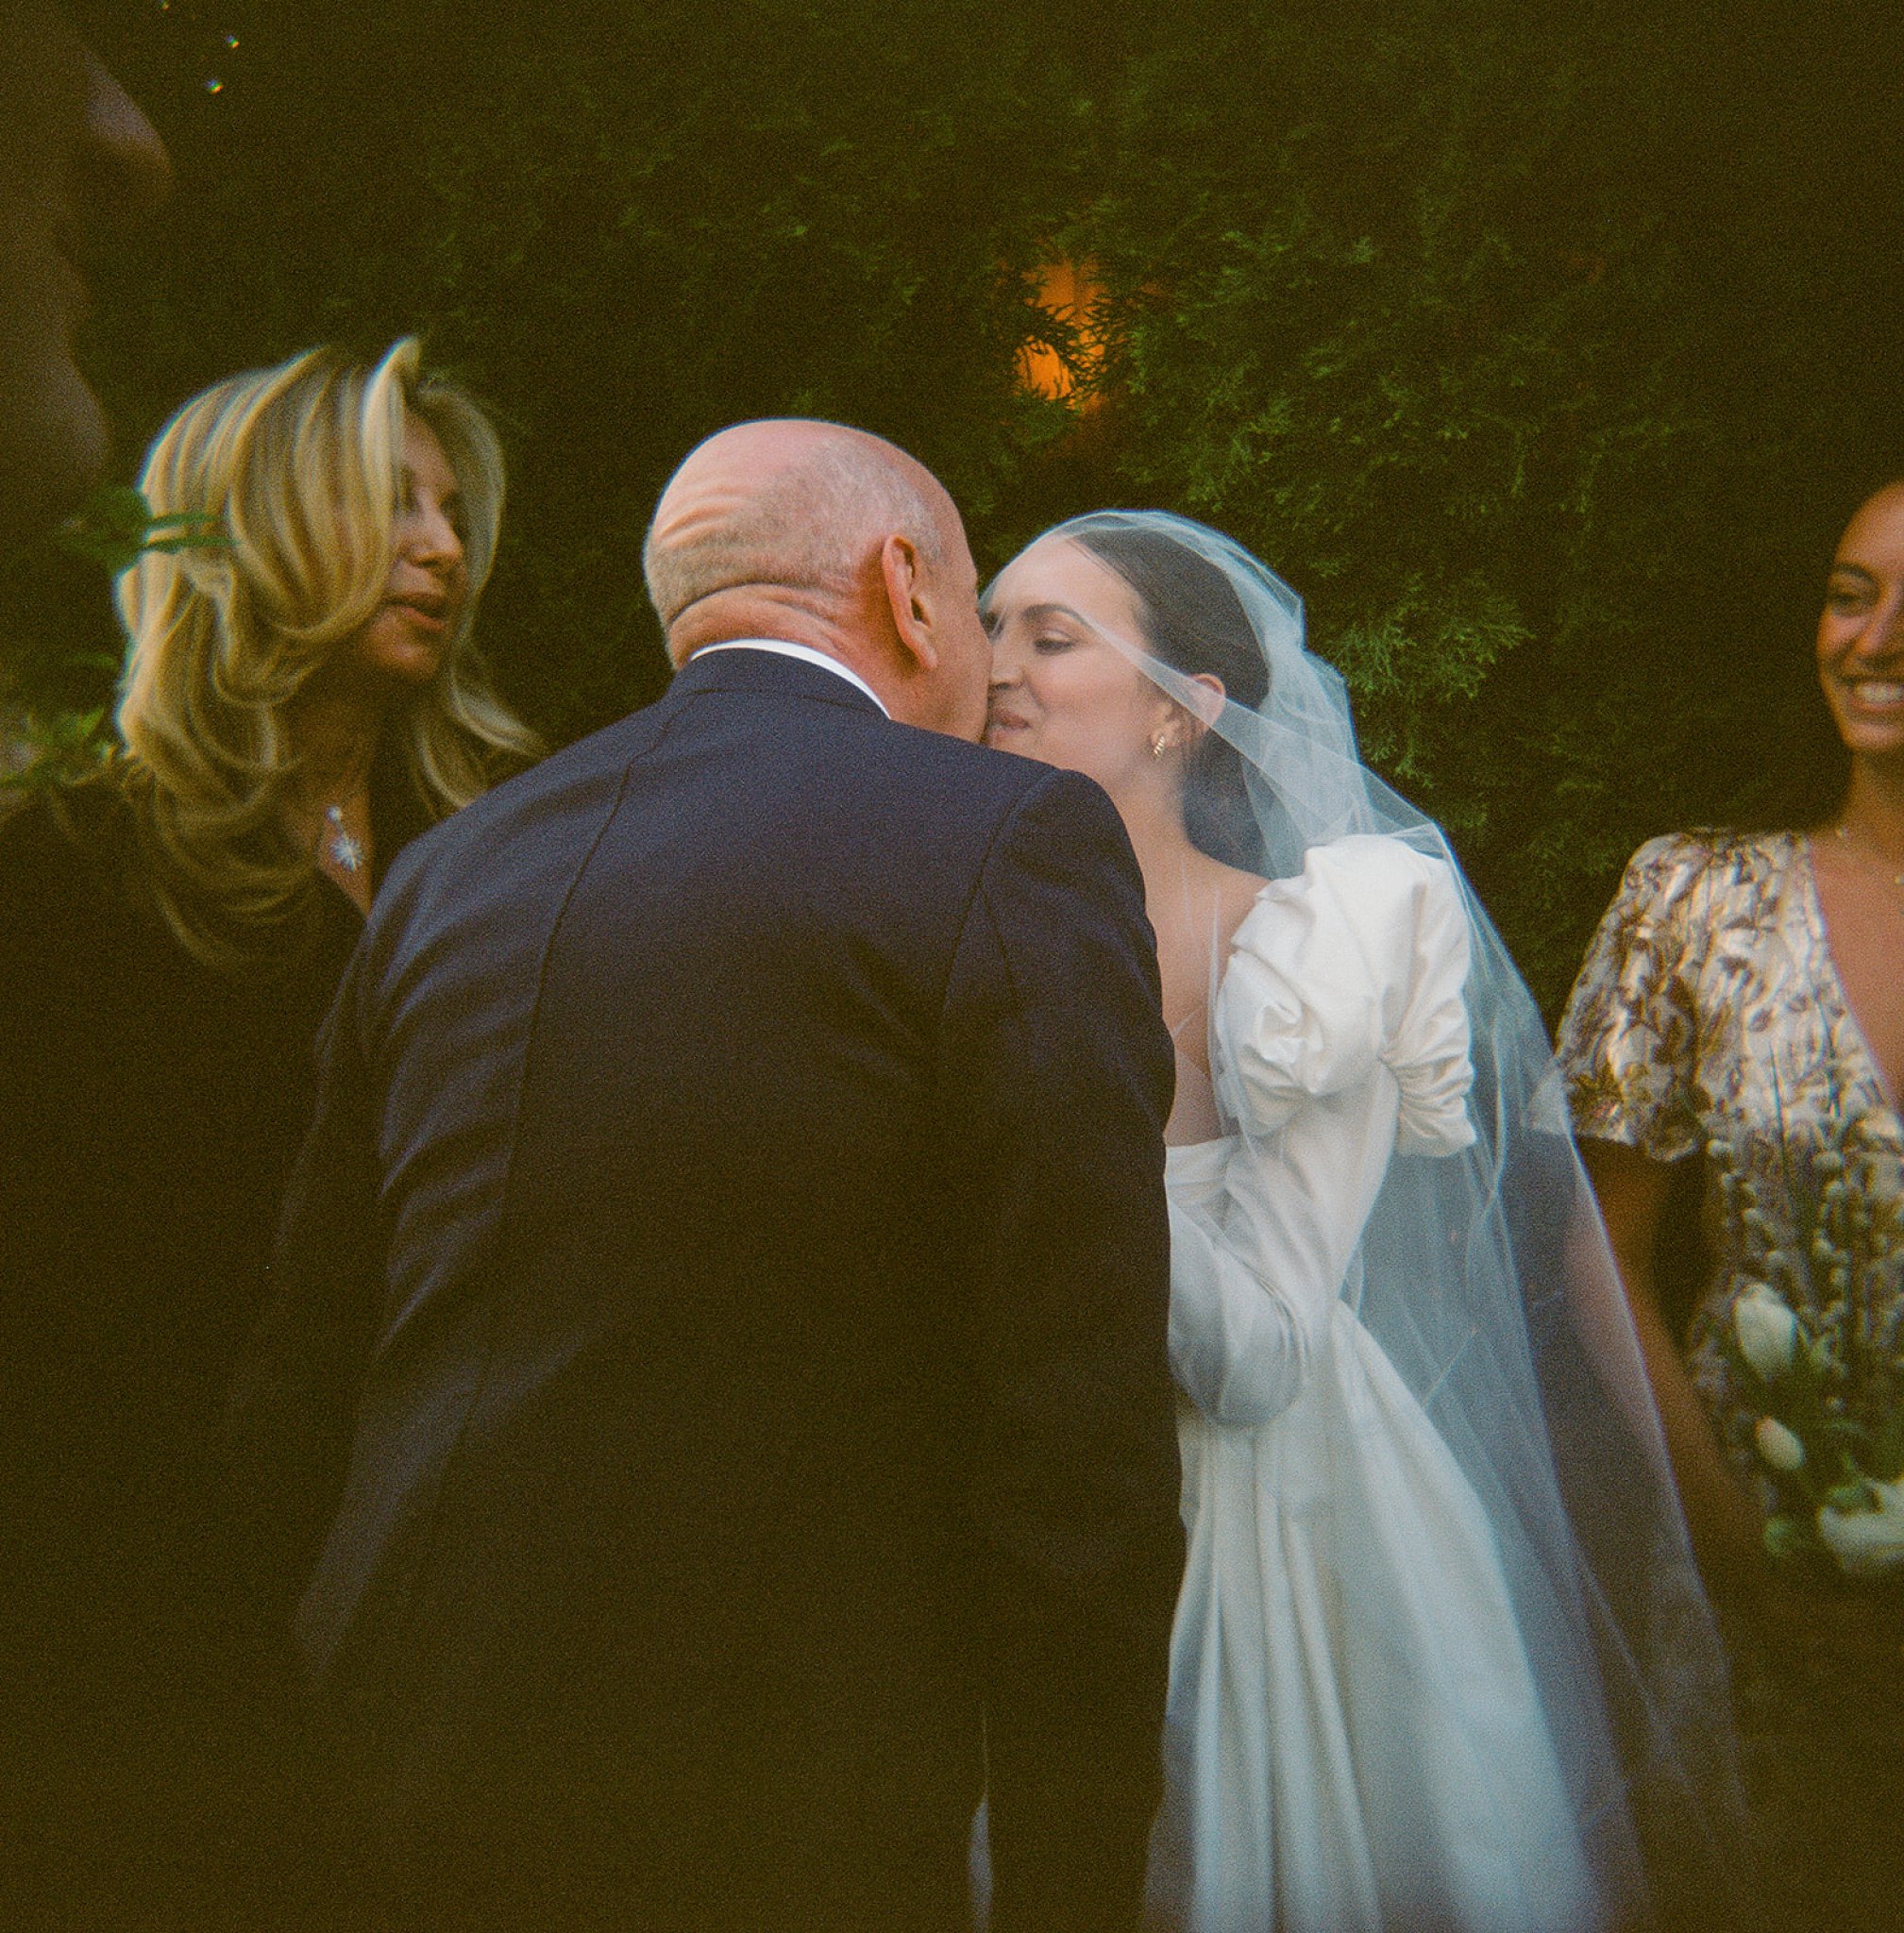 The bride and groom share a kiss as officiant and guests look on and smile.